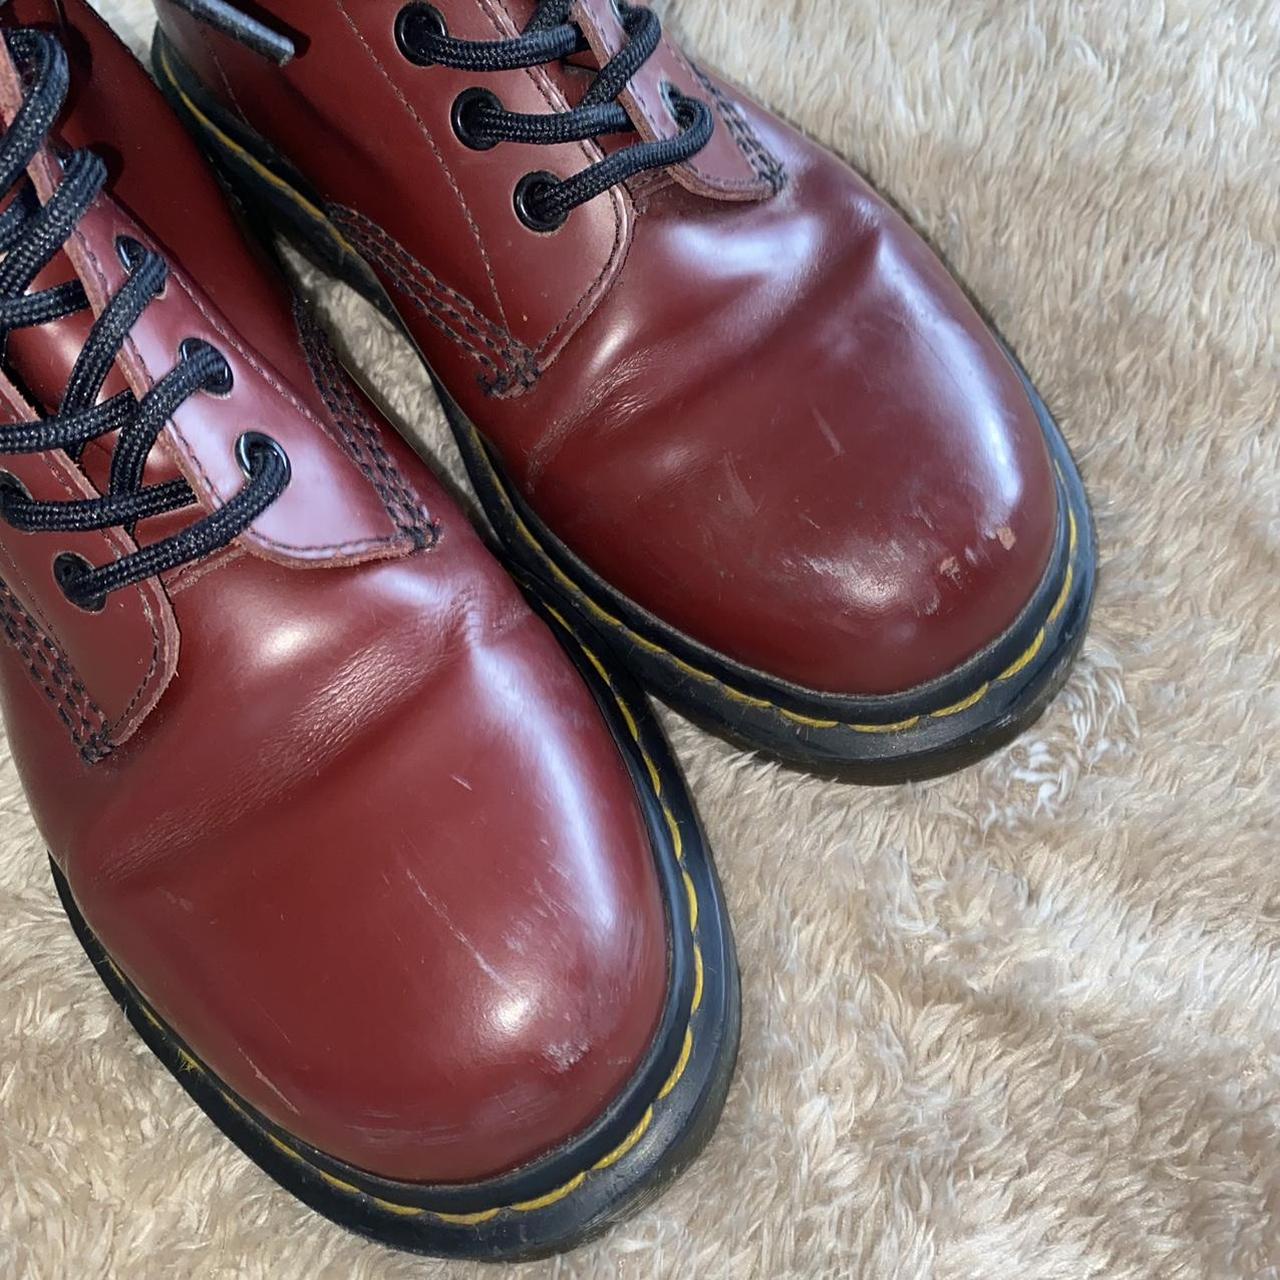 Maroon Doc Martens 1460 Cherry Smooth Leather 🍒... - Depop